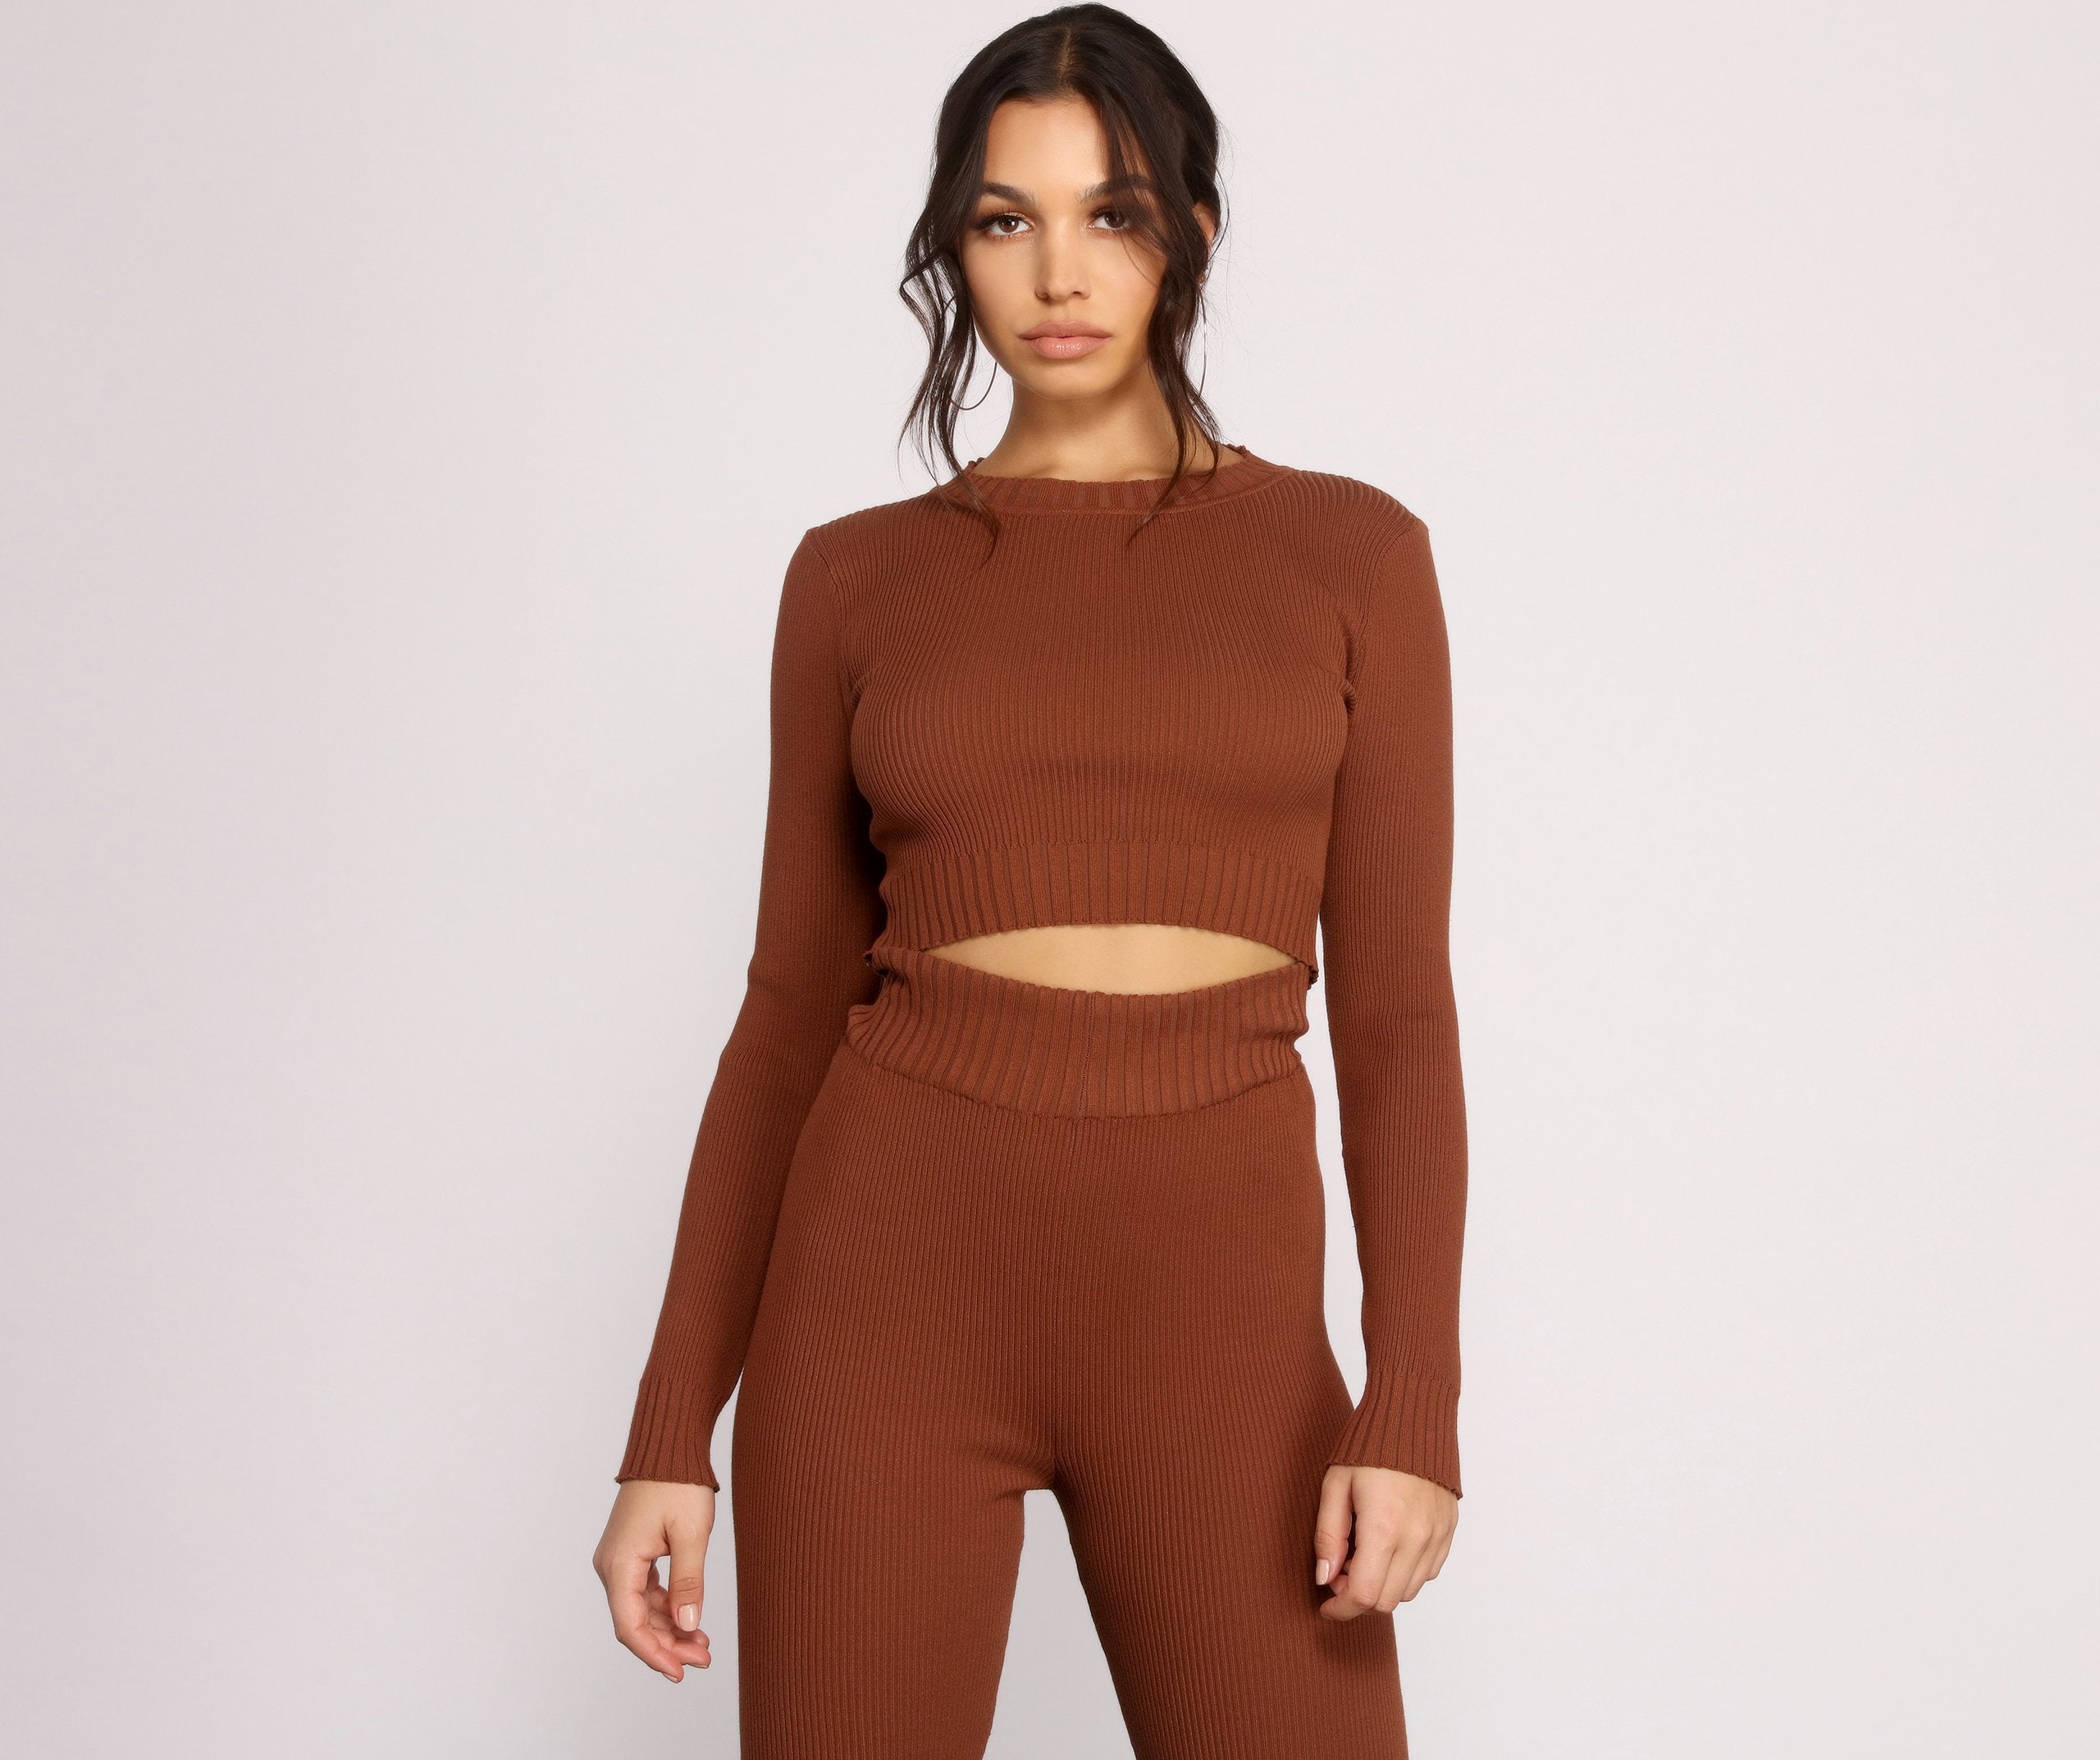 Cuddle Up Cozy Crop Top - Lady Occasions